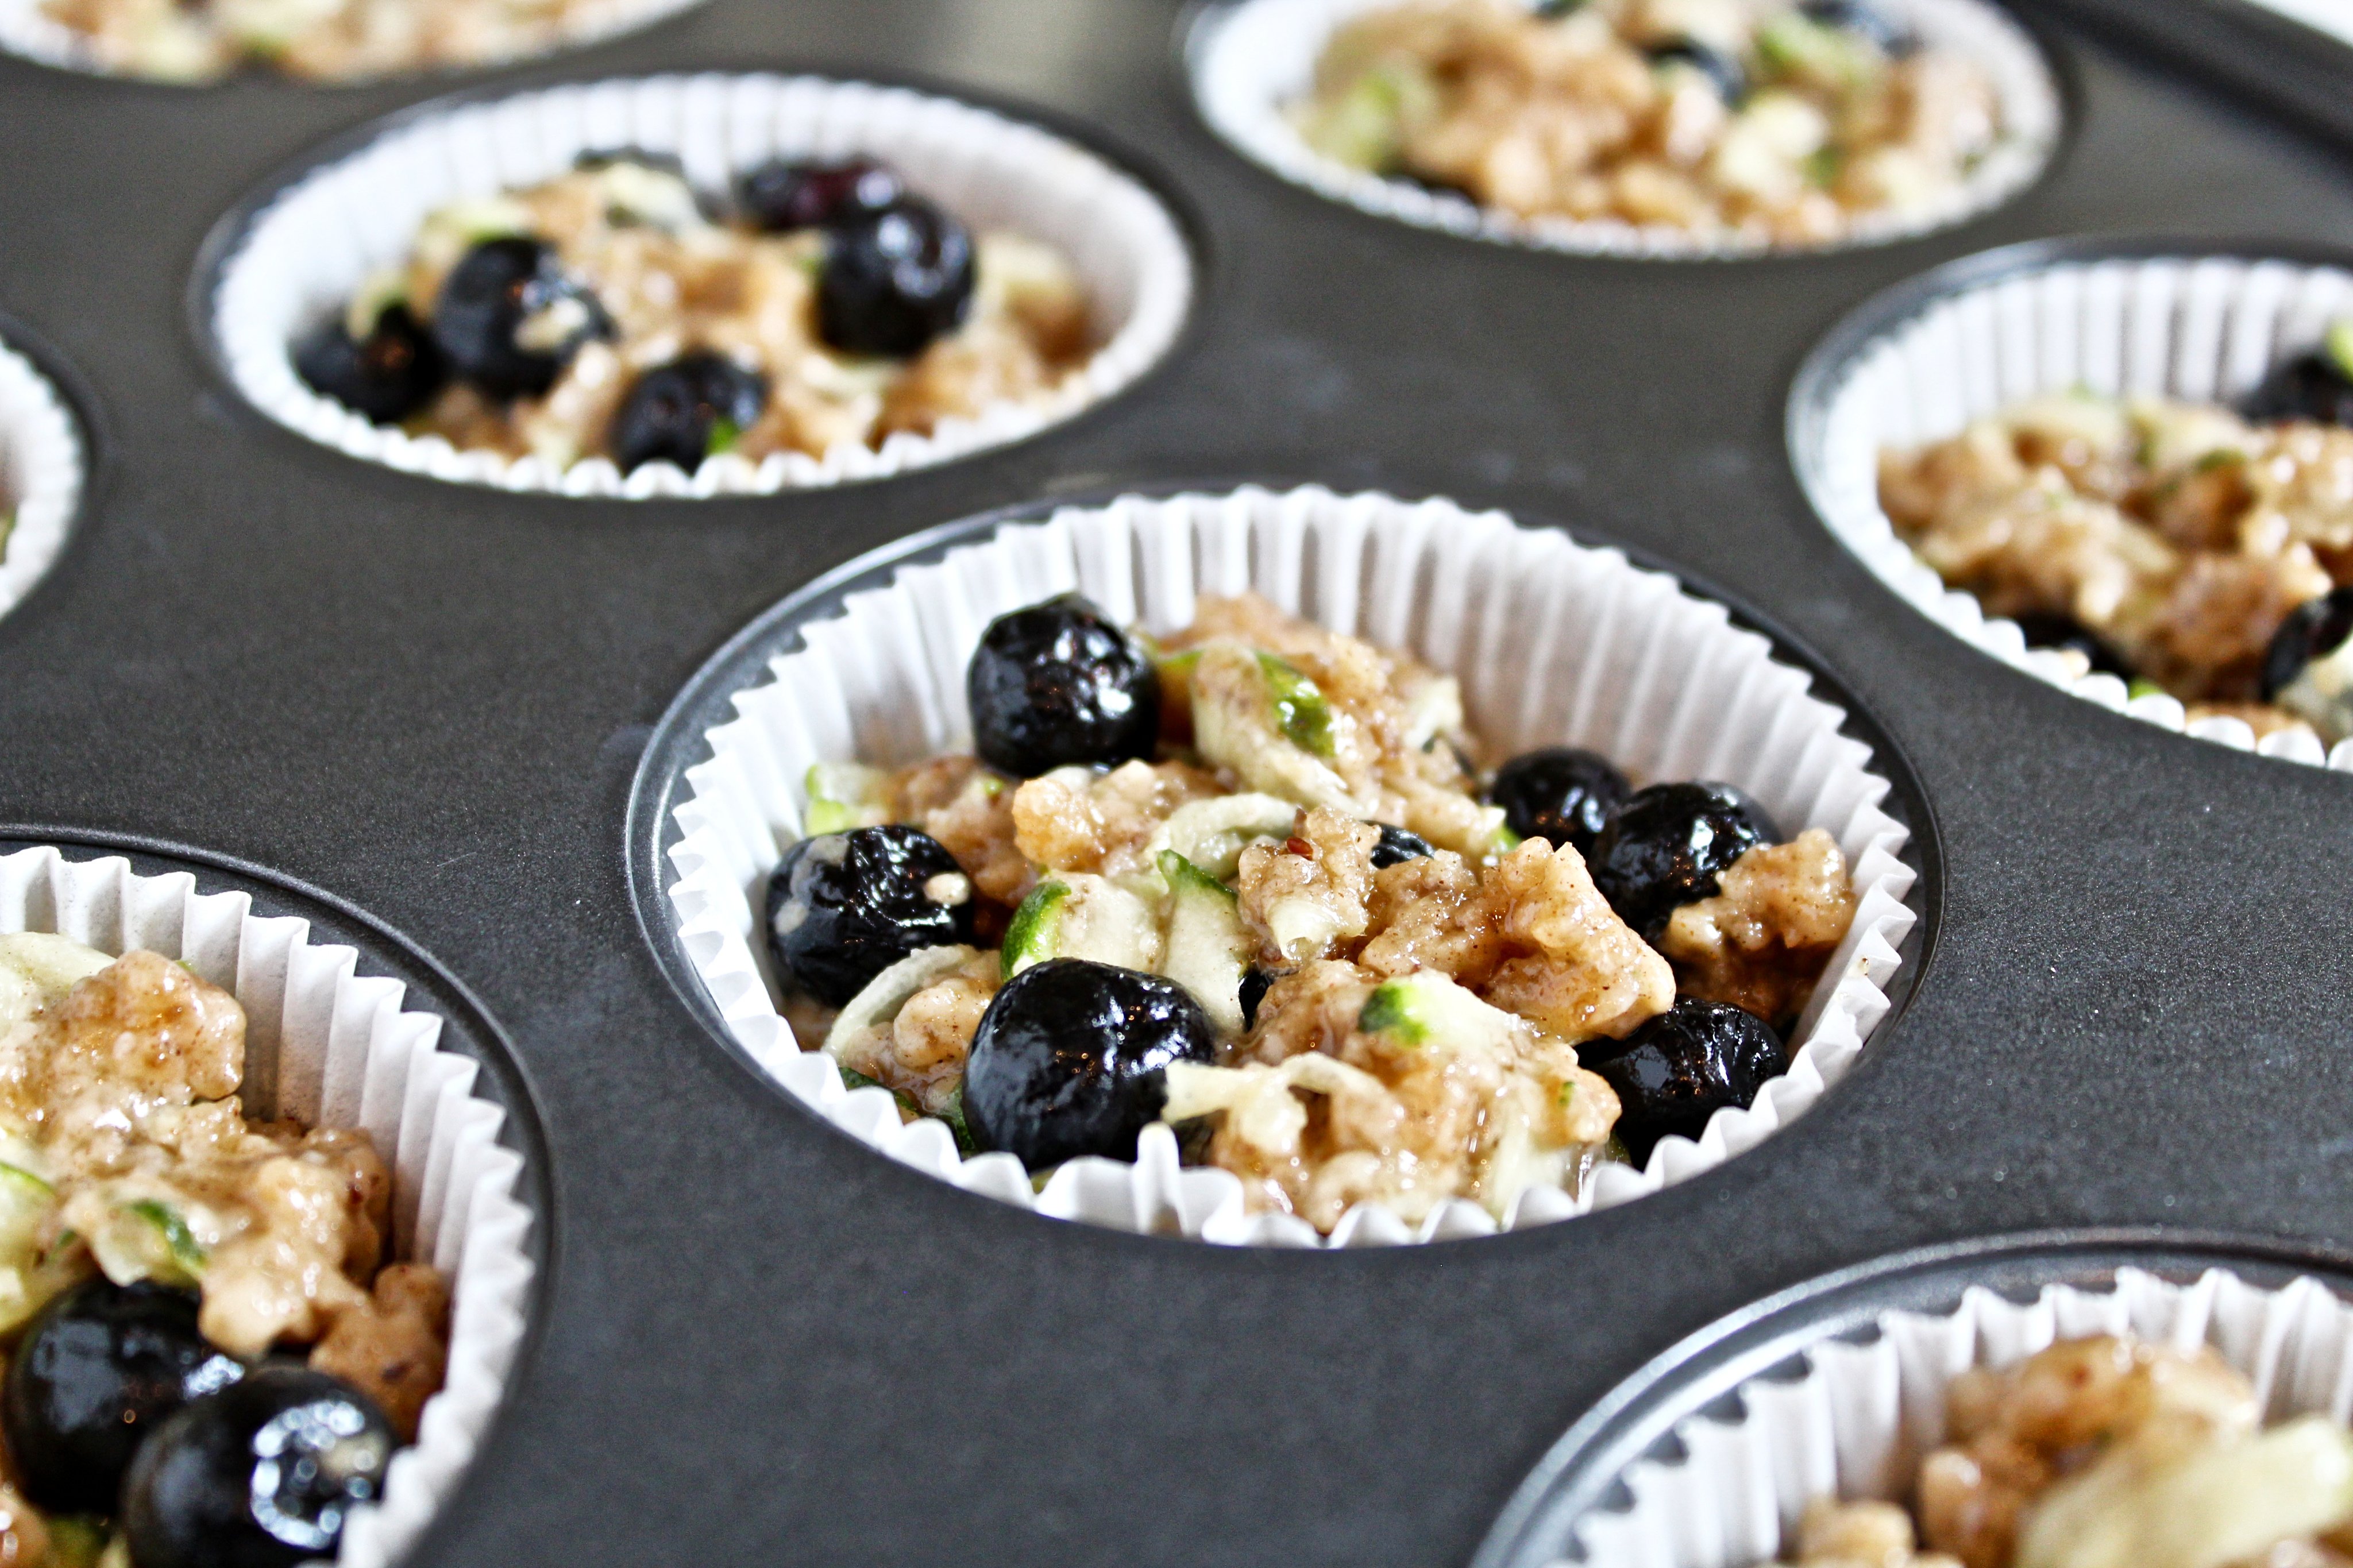 Blueberry And Zucchini Muffins With Streusel Topping,How Often Do Puppies Poop At 8 Weeks